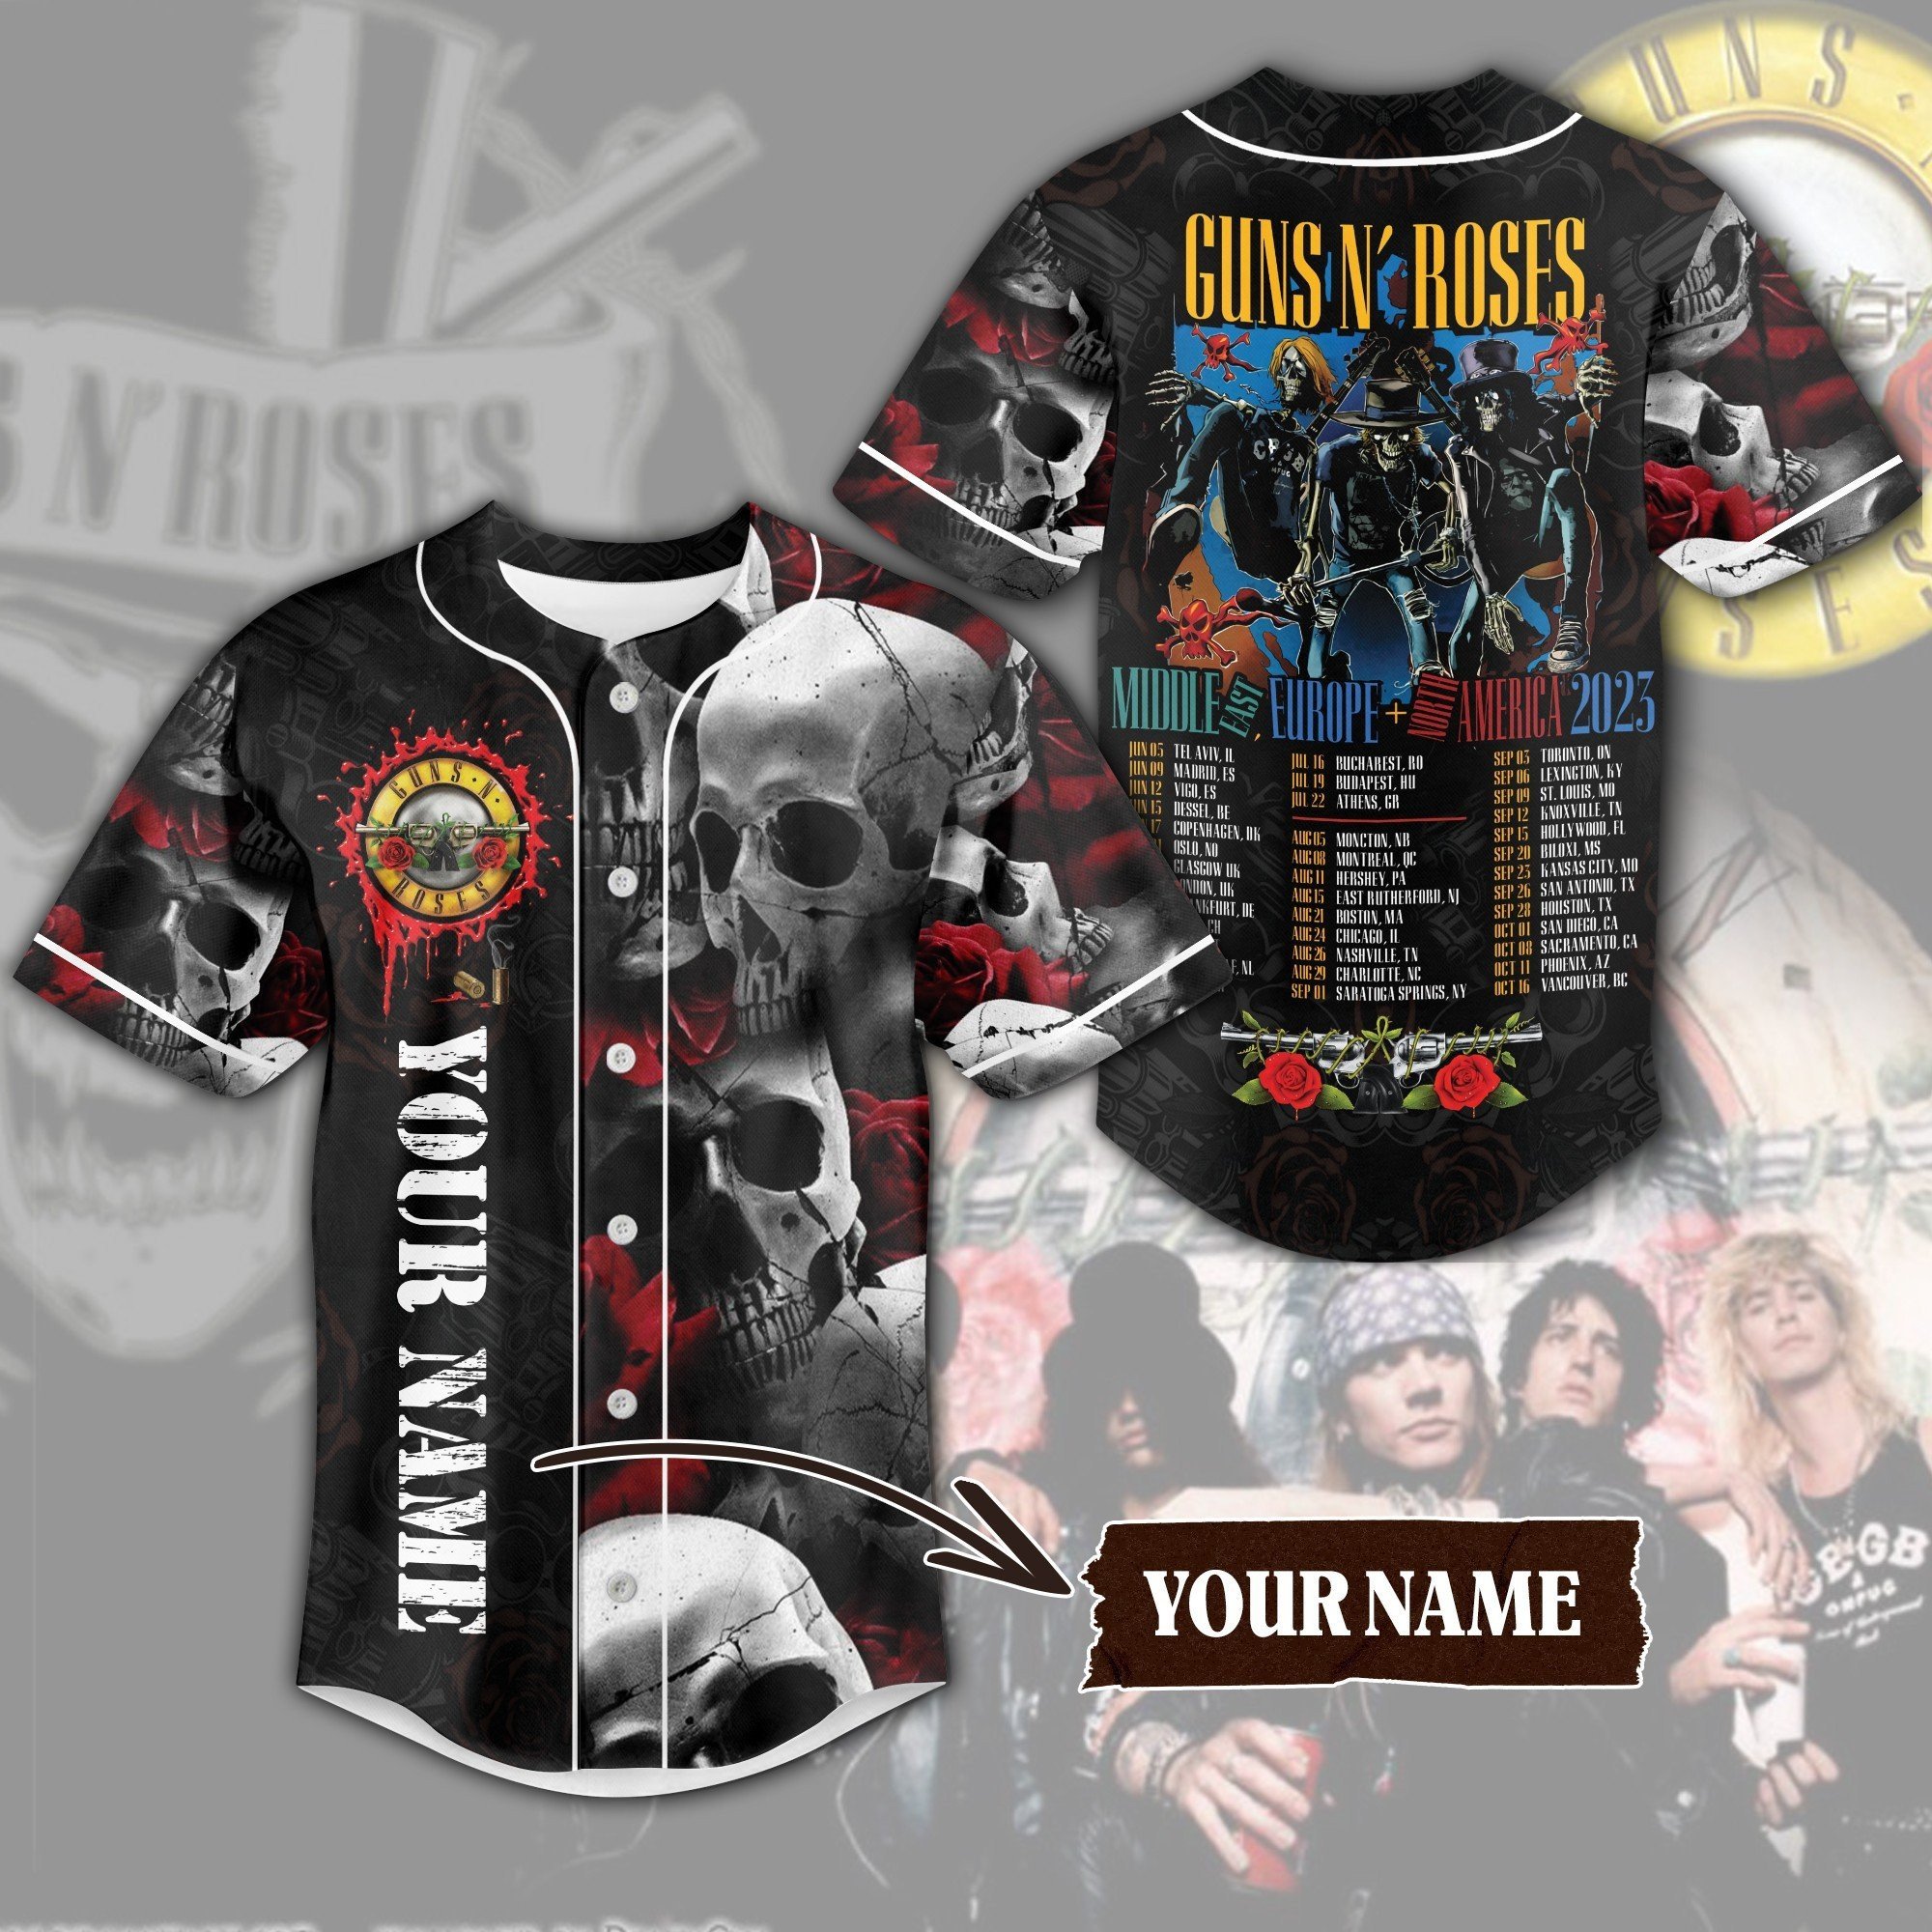 JRS-GNR-DT-140623A4 - Solic Merch